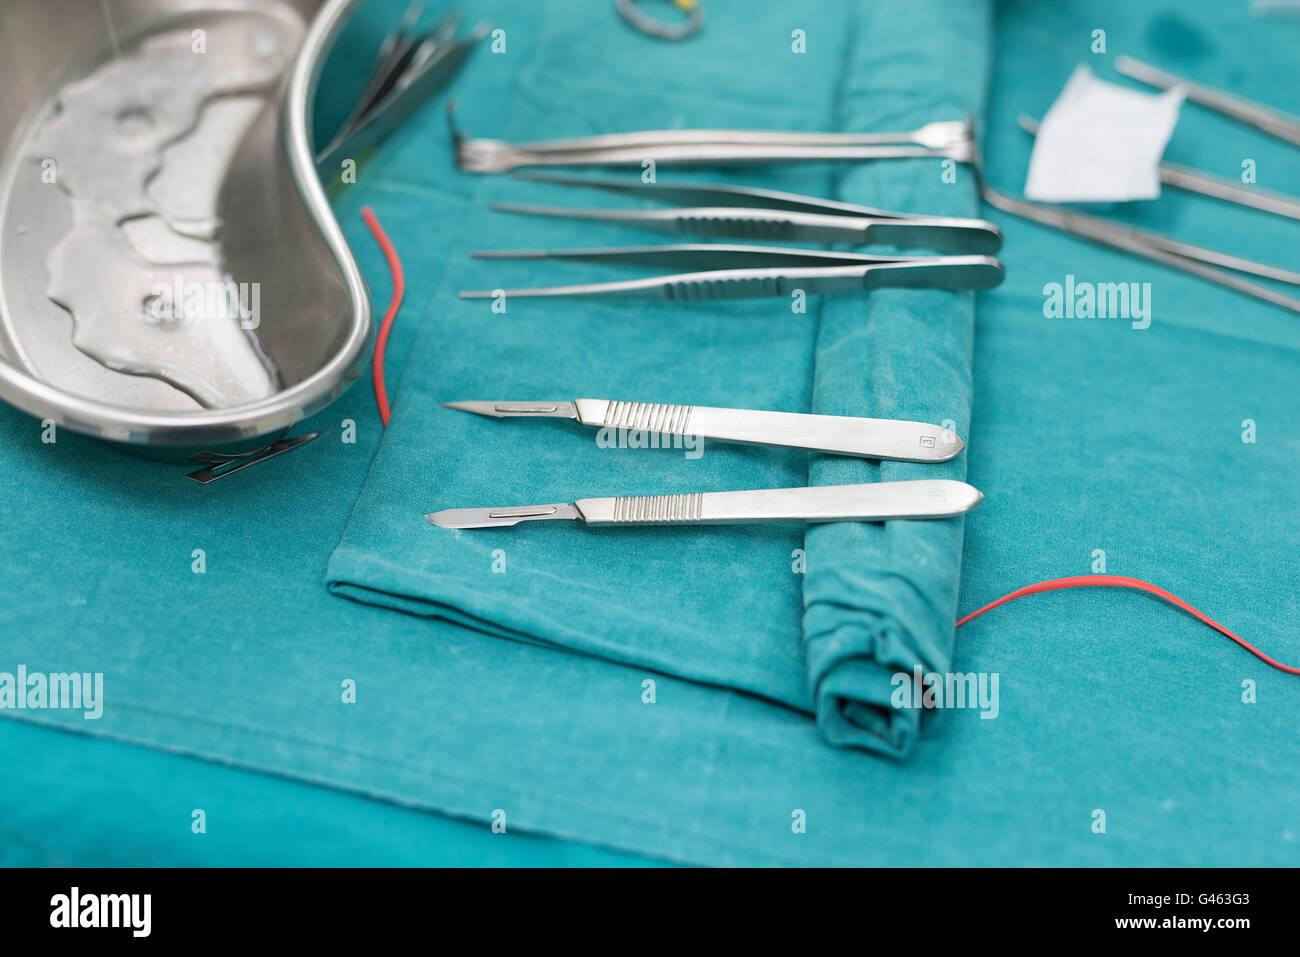 surgical instruments for surgery Stock Photo